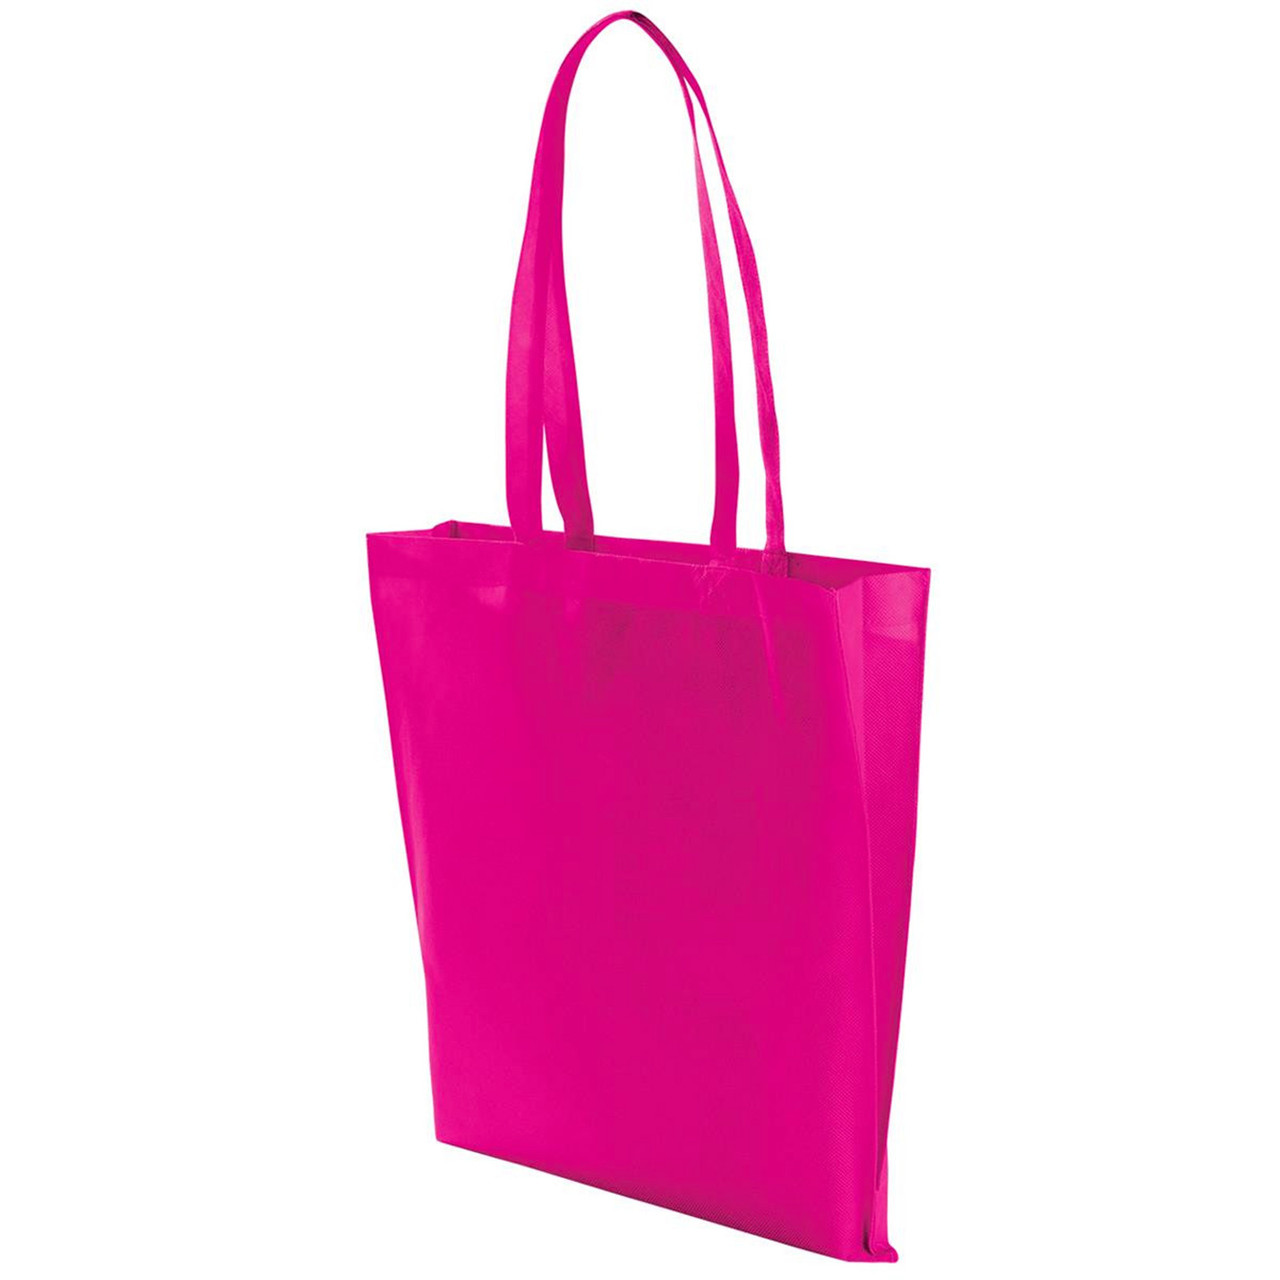 Wholesale non-woven conference bags | plain totes & bags | 11 blank colours